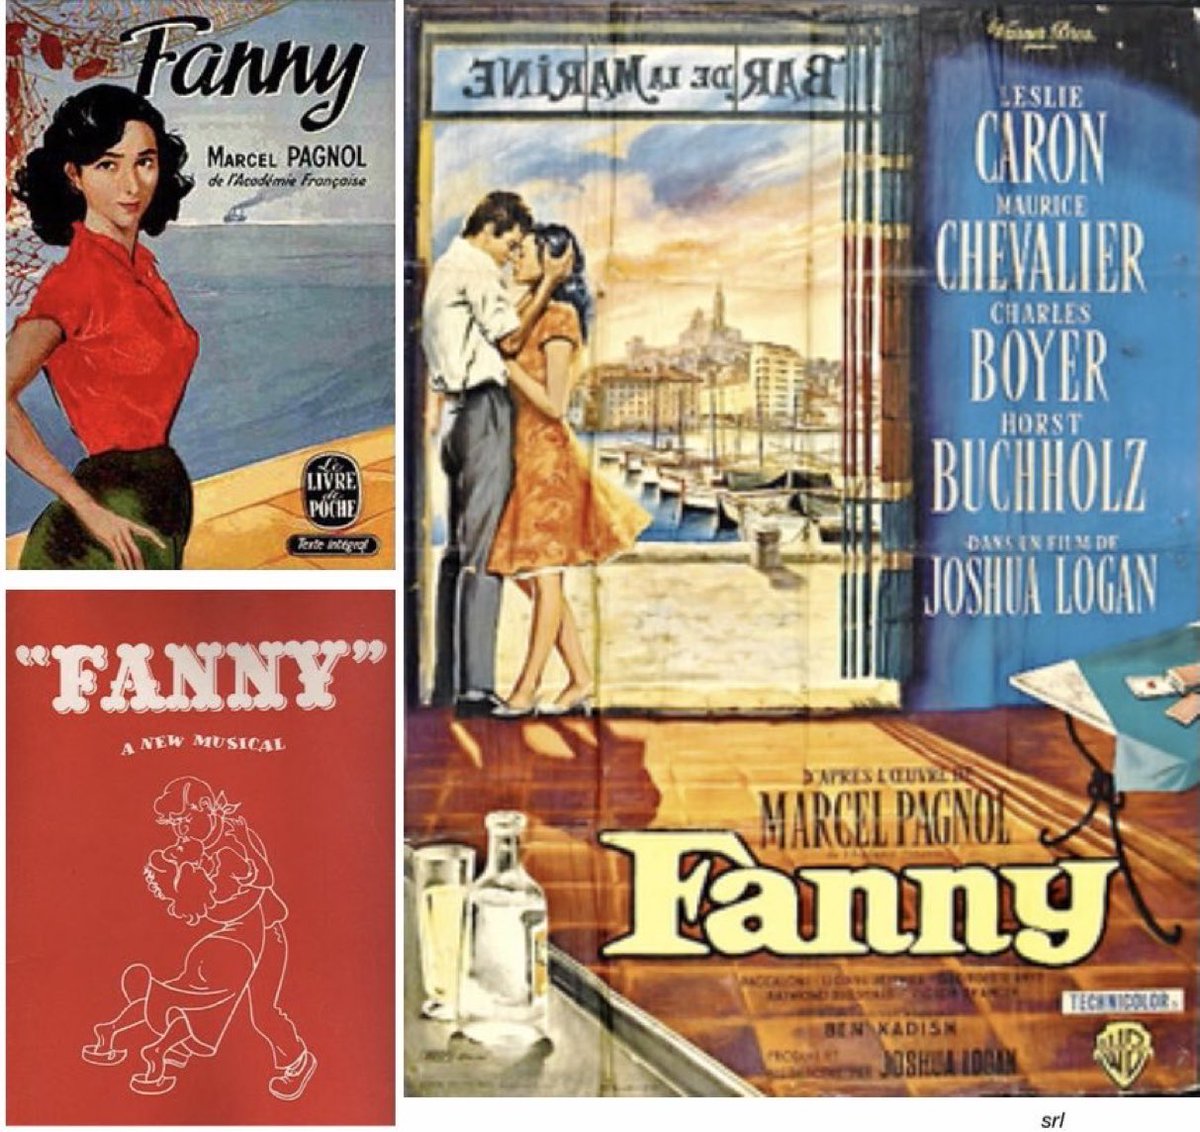 3pm TODAY on @TalkingPicsTV 

The 1961 #Romantic #Drama film🎥 “Fanny” directed by #JoshuaLogan from a screenplay by #JuliusJEpstein

Based on the 1954 musical🎭🎶 which was based on the 1929 play🎭 by #MarcelPagnol

🌟#LeslieCaron #MauriceChevalier #CharlesBoyer #HorstBuchholz